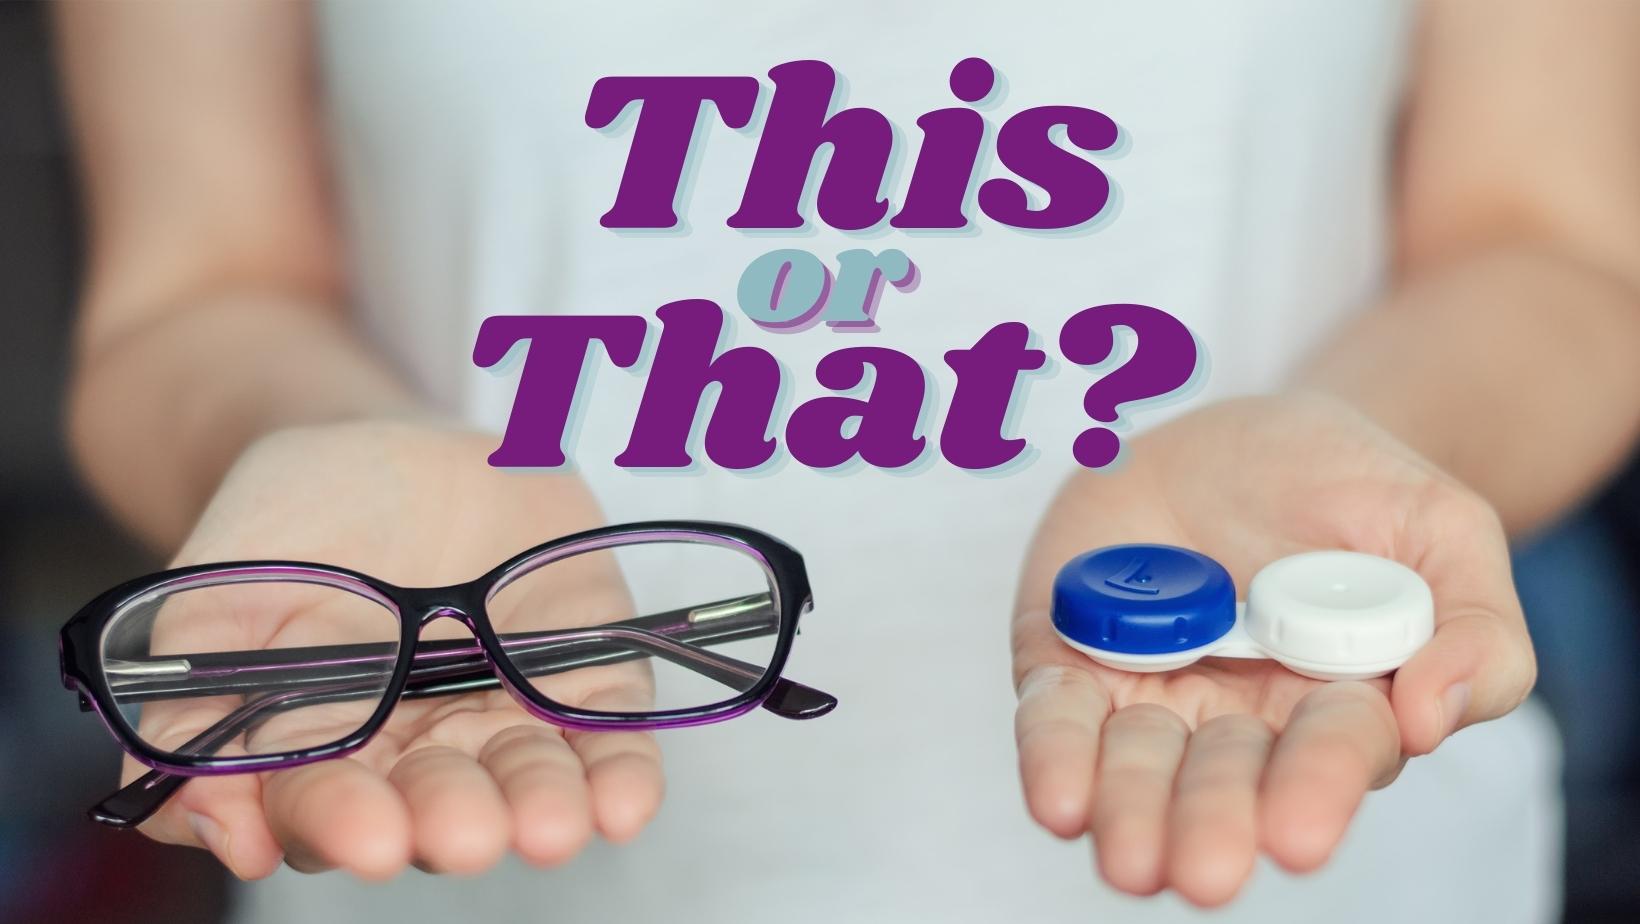 Graphic contains an image of a woman with two outstretched hands. In her right hand she holds a pair of eyeglasses and in her left she holds a contact lens case. Over top the image is text that reads "This or That?"